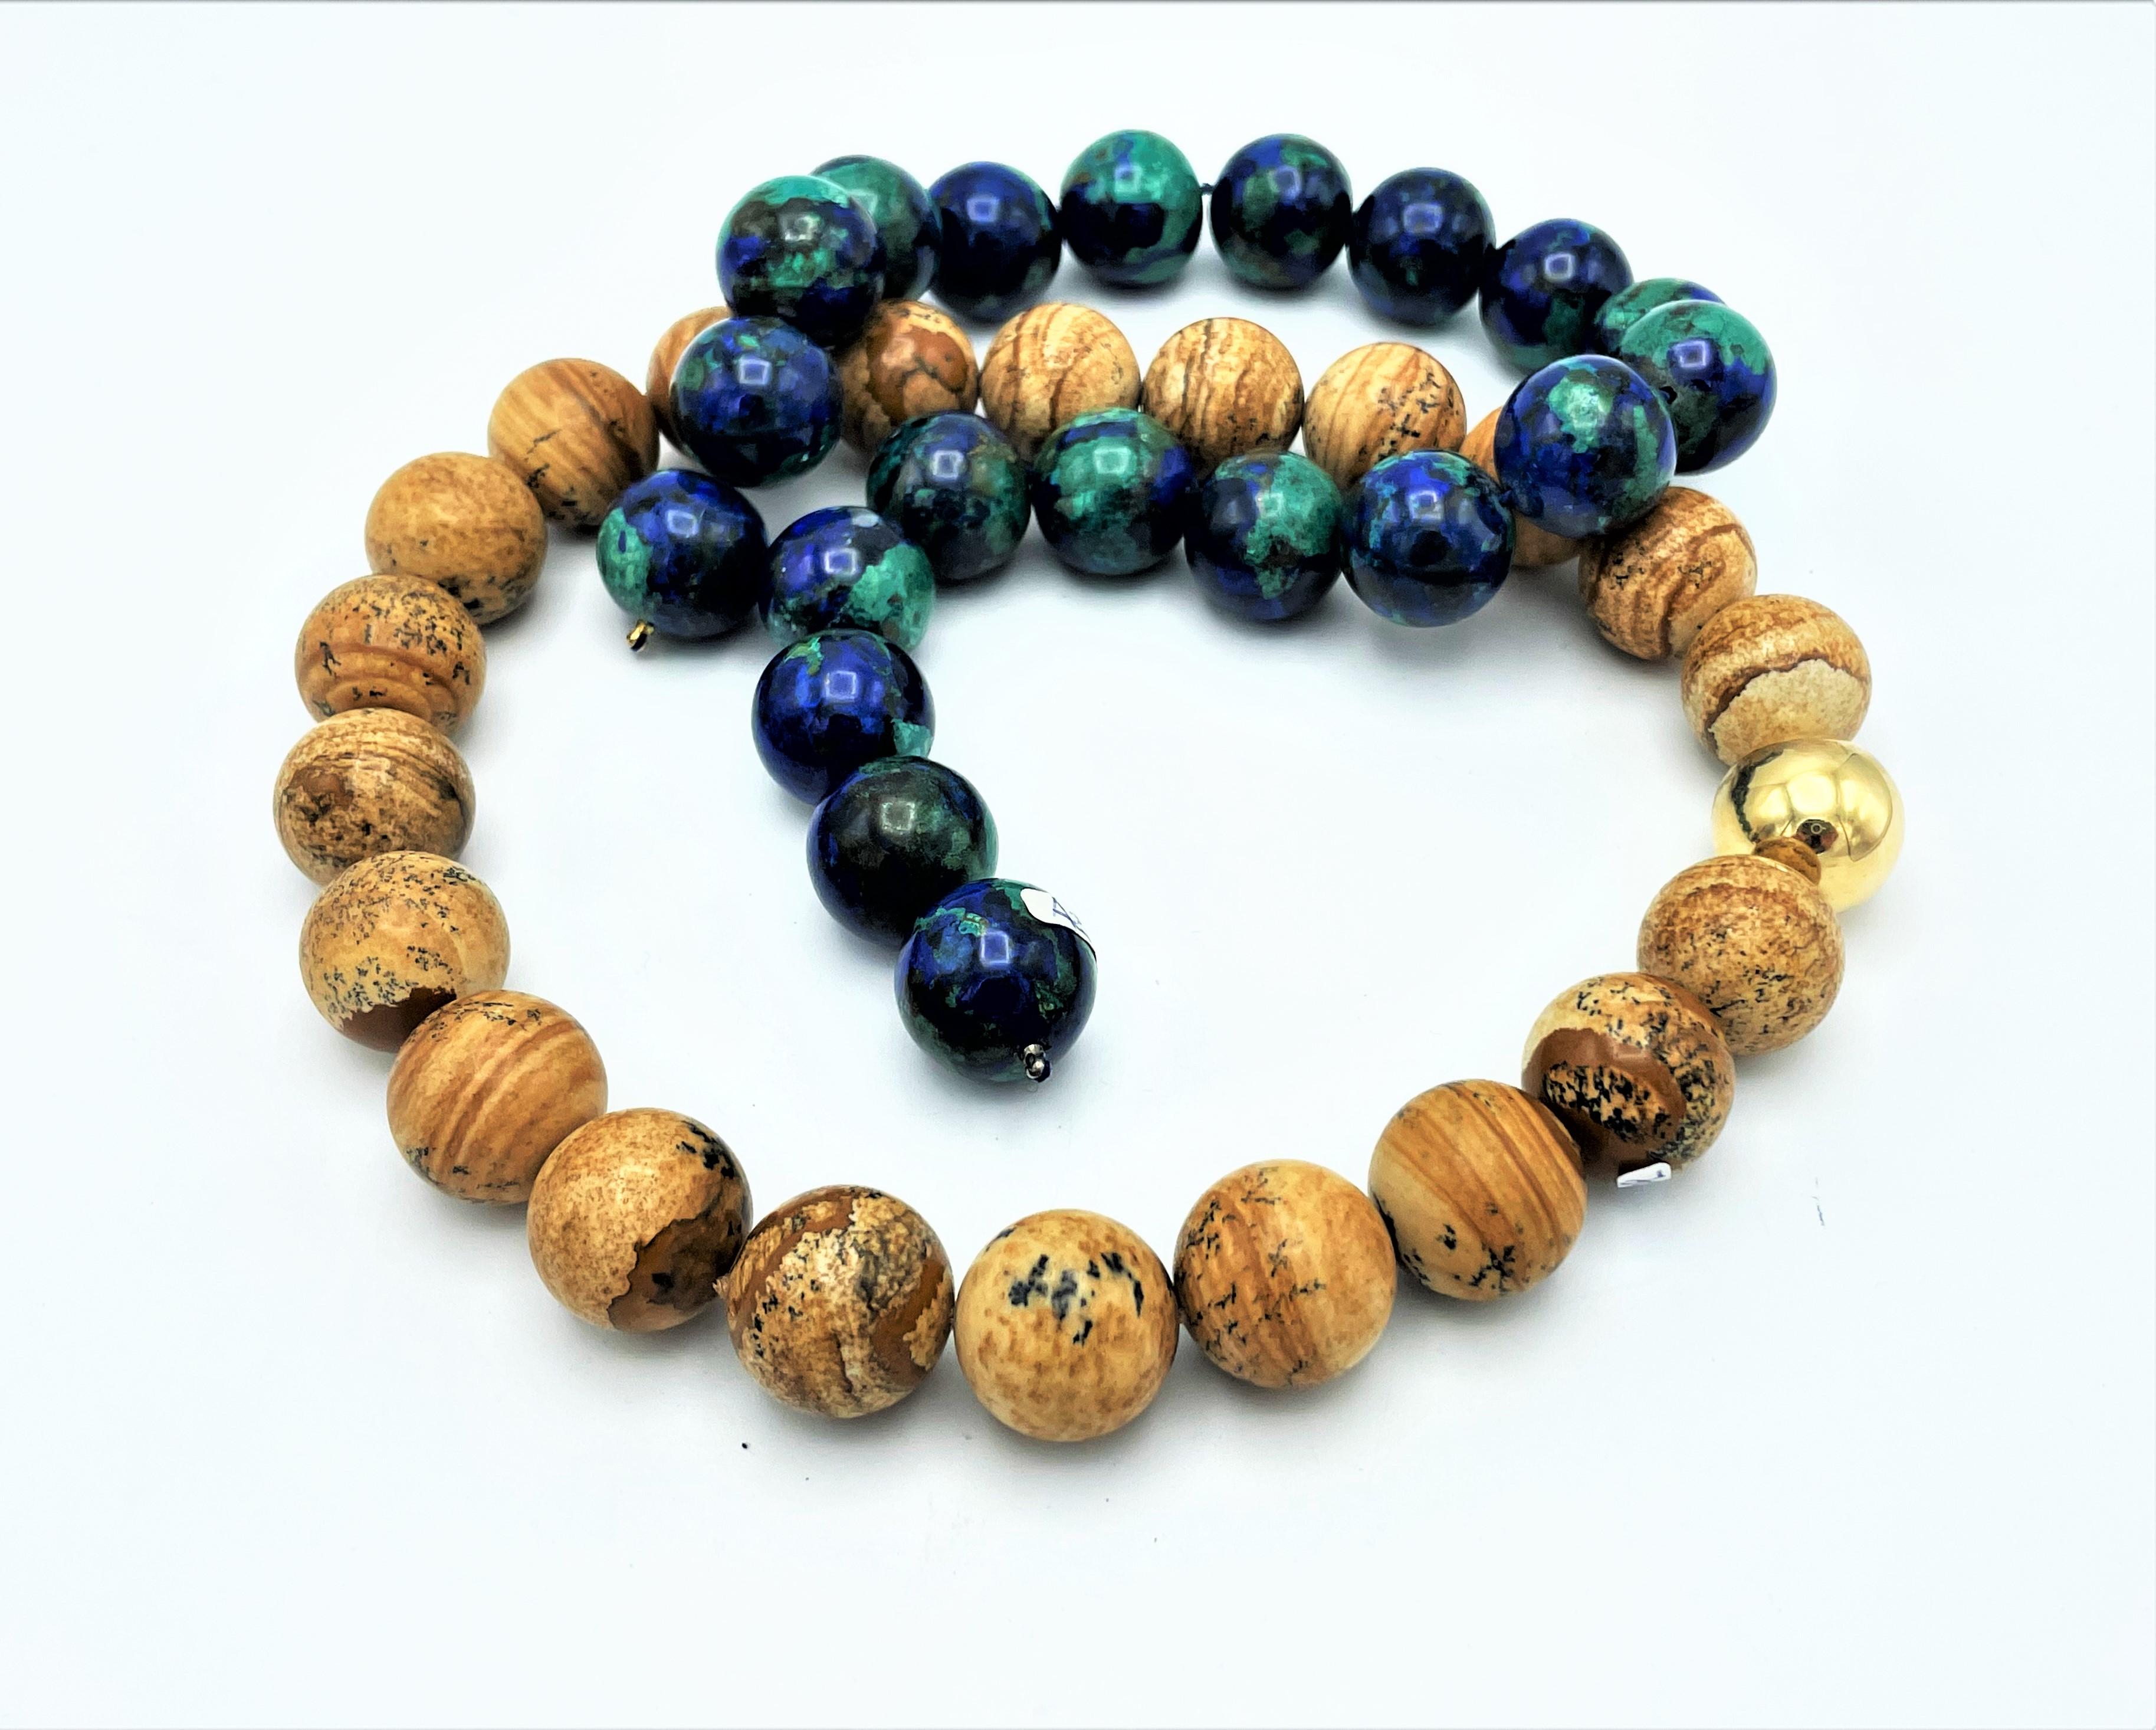 About
Both gemstone ball chains Azurite-Malacite and landscape Jaspis can be worn with an interchangeable gold-plated ball as a clasp.
Measurement: 
Azurit-Malachit length 15,5 inches ( 40 cm) 20 balls, diameter 0,8 inches (2 cm) - Length with clasp